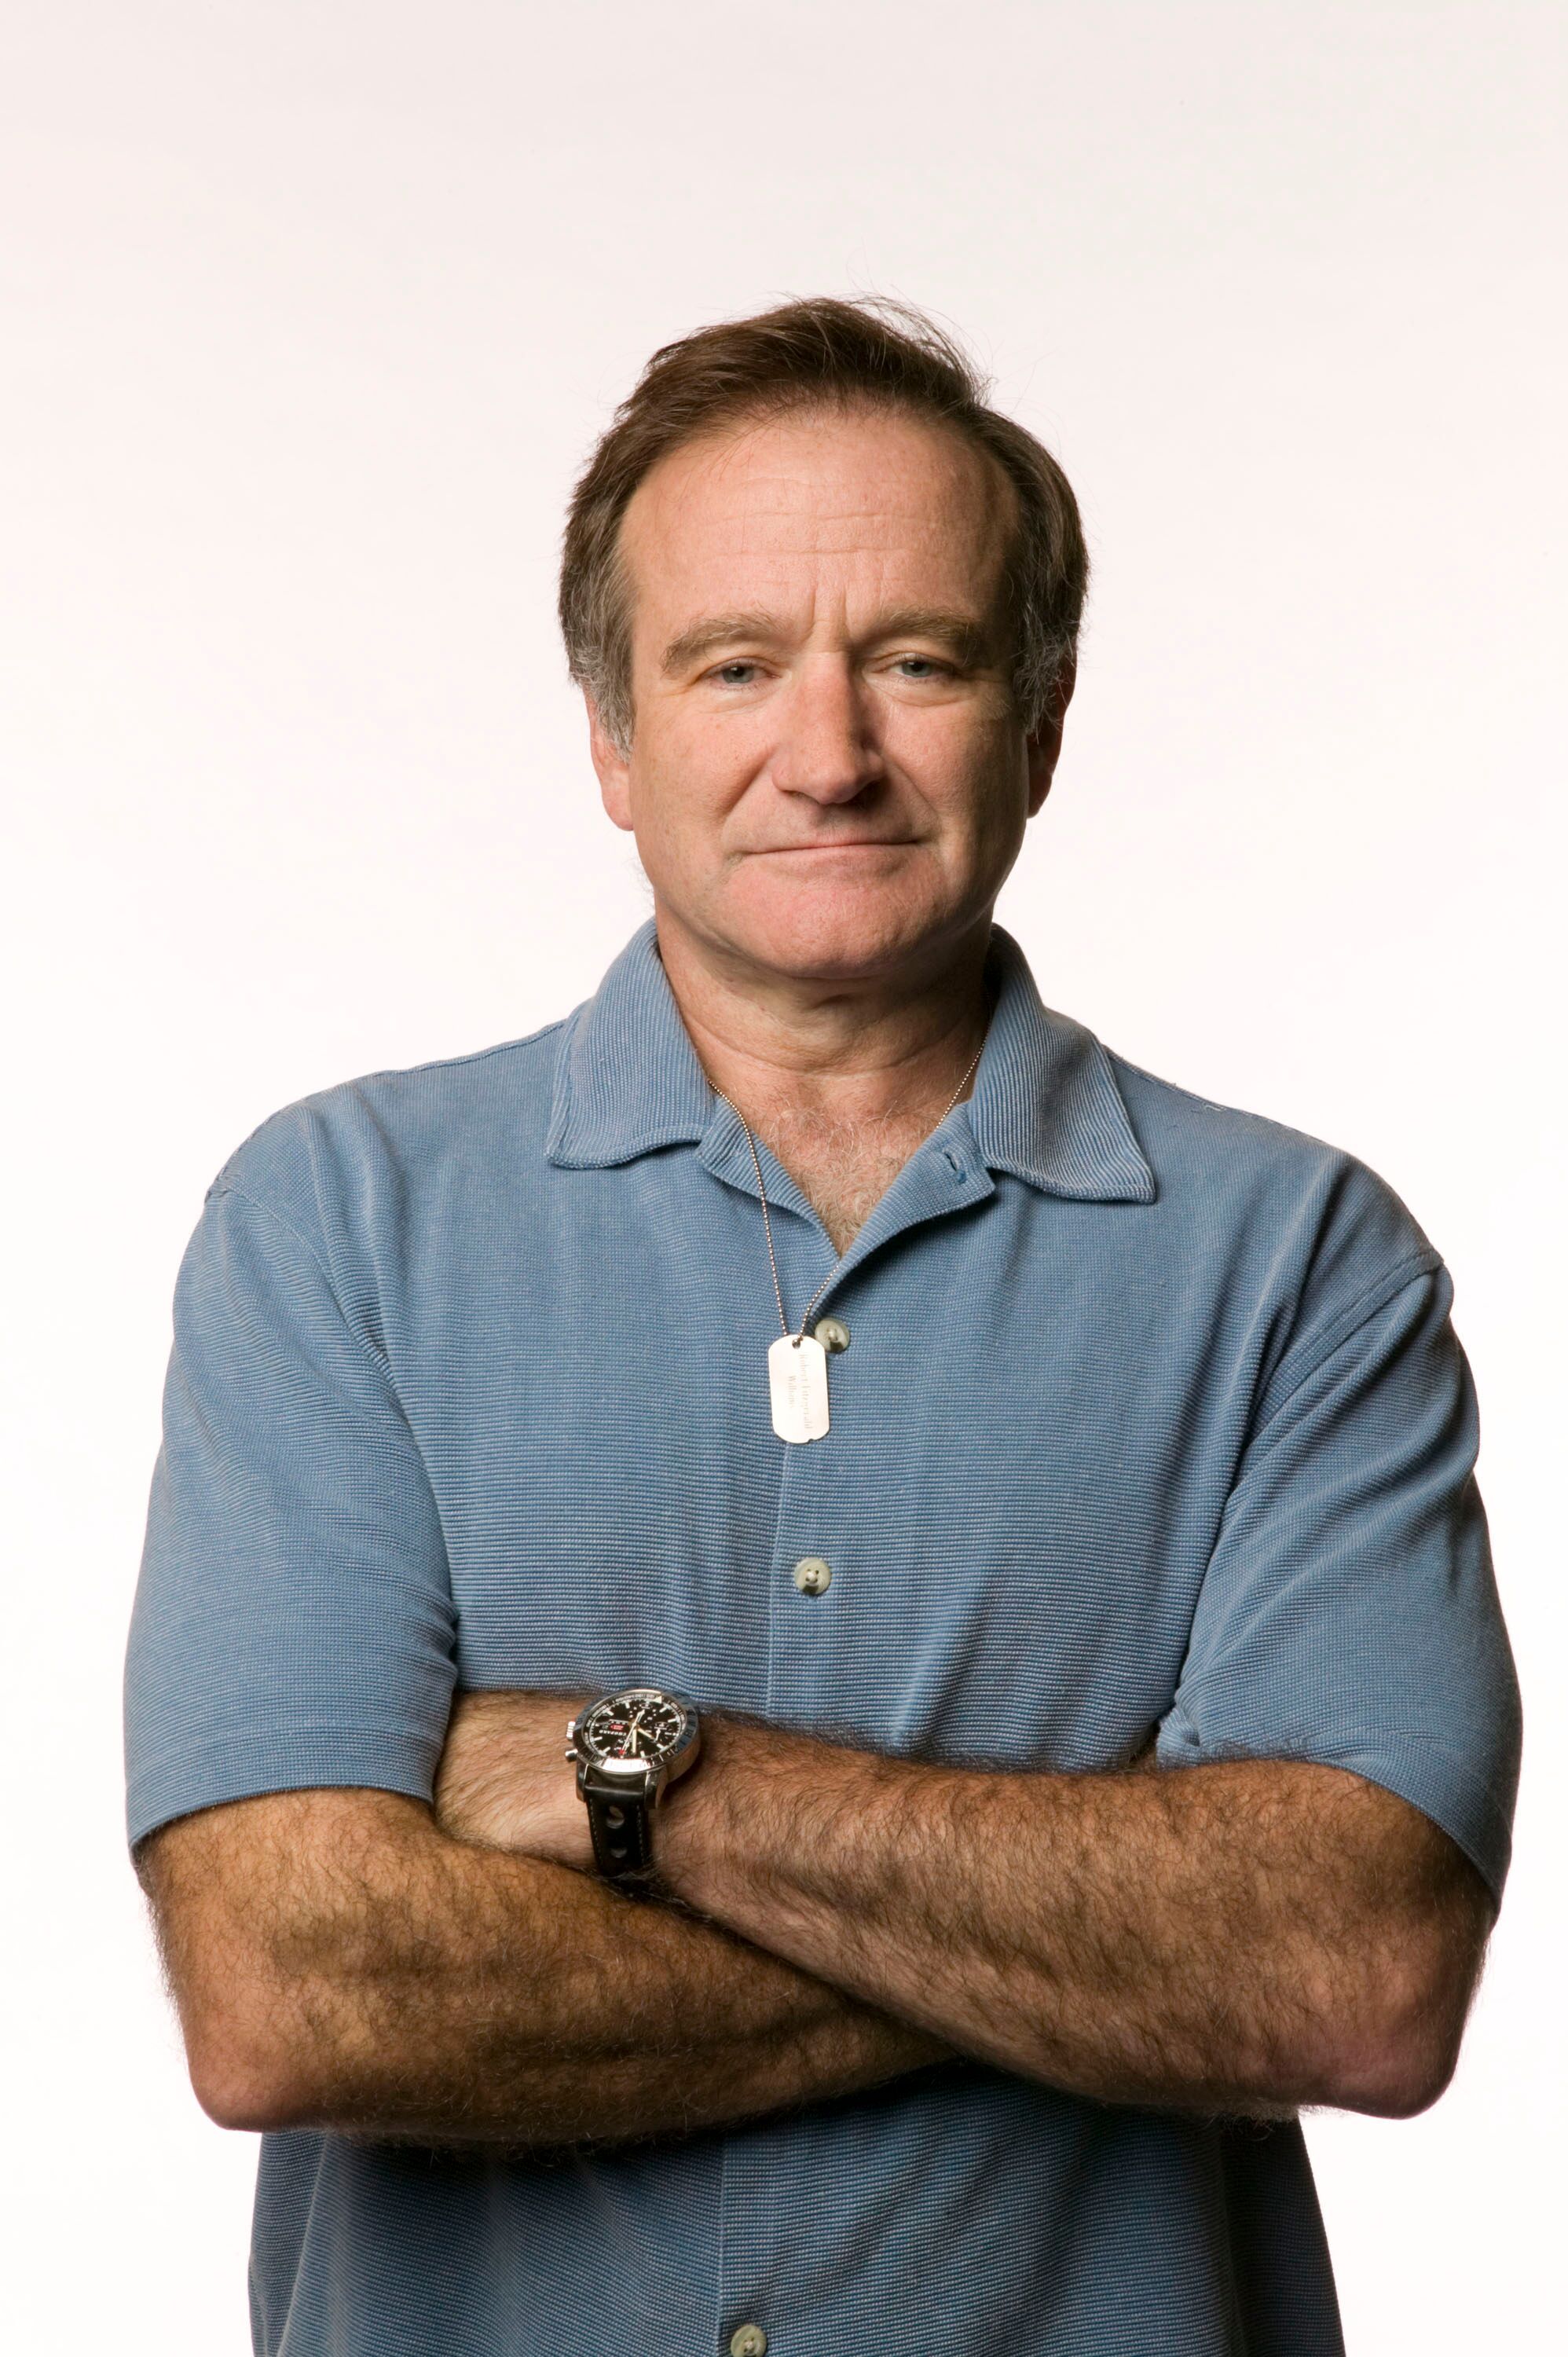 Robin Williams in a promotional portrait for the Search for the Cause campaign. | Source: Getty Images